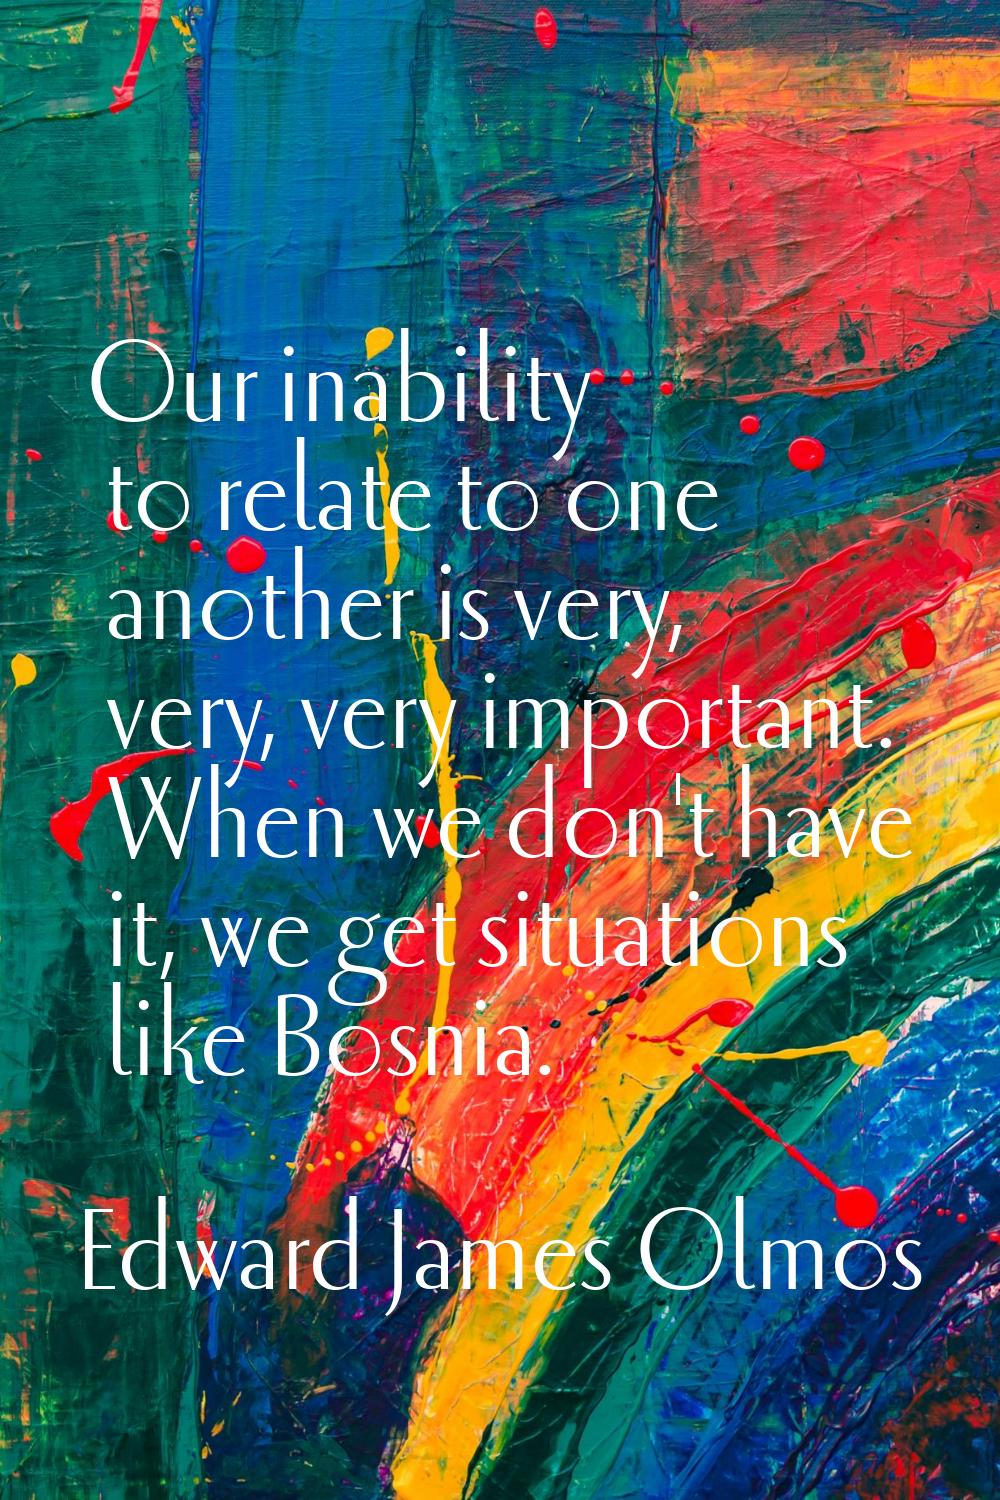 Our inability to relate to one another is very, very, very important. When we don't have it, we get